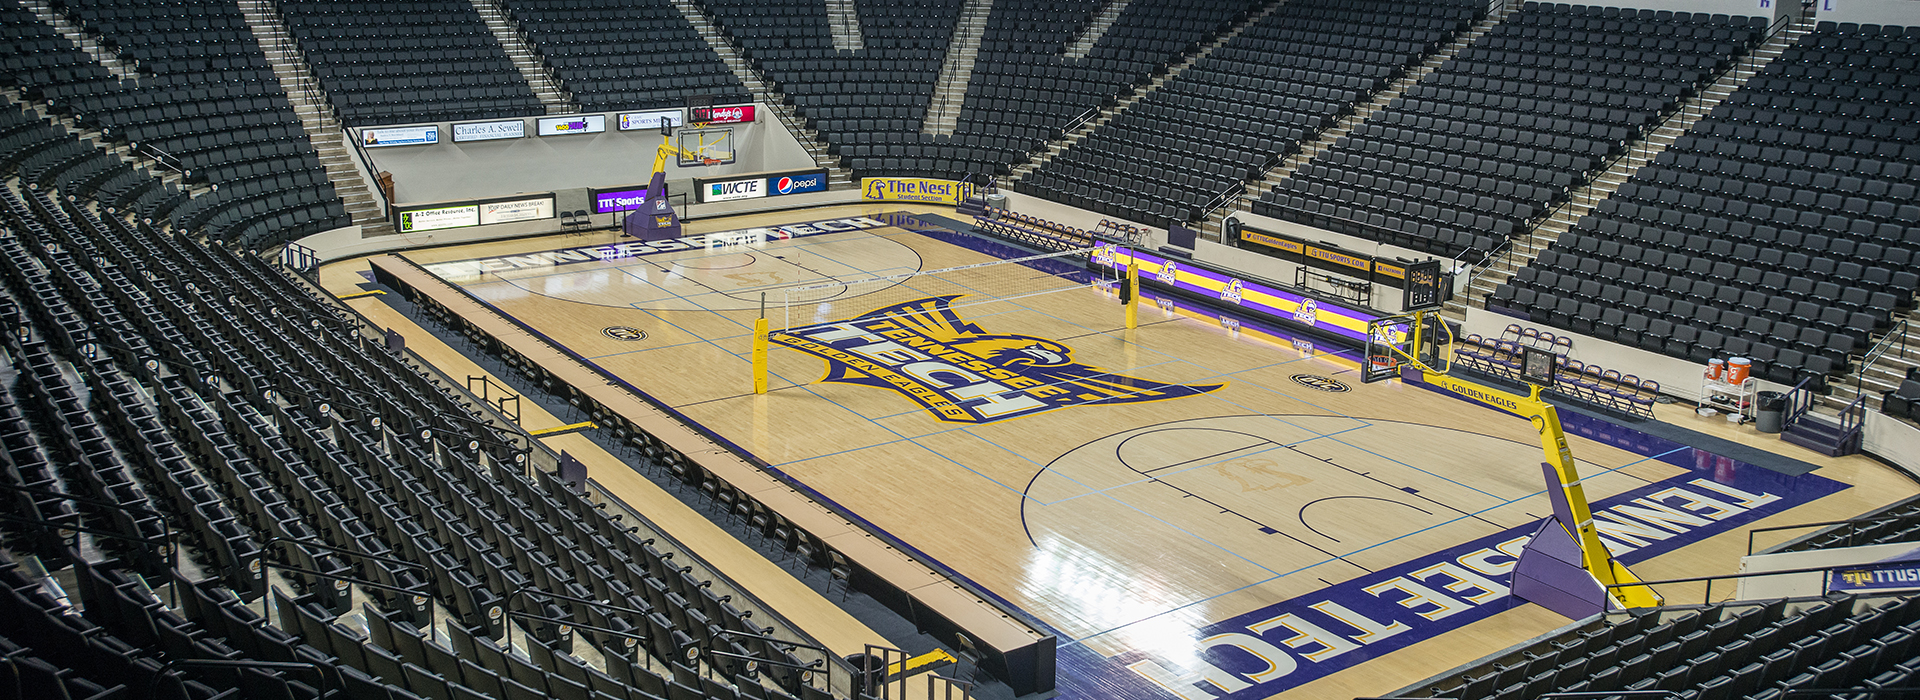 Monday volleyball match moved, Tech to play DH against Eastern Illinois Sunday